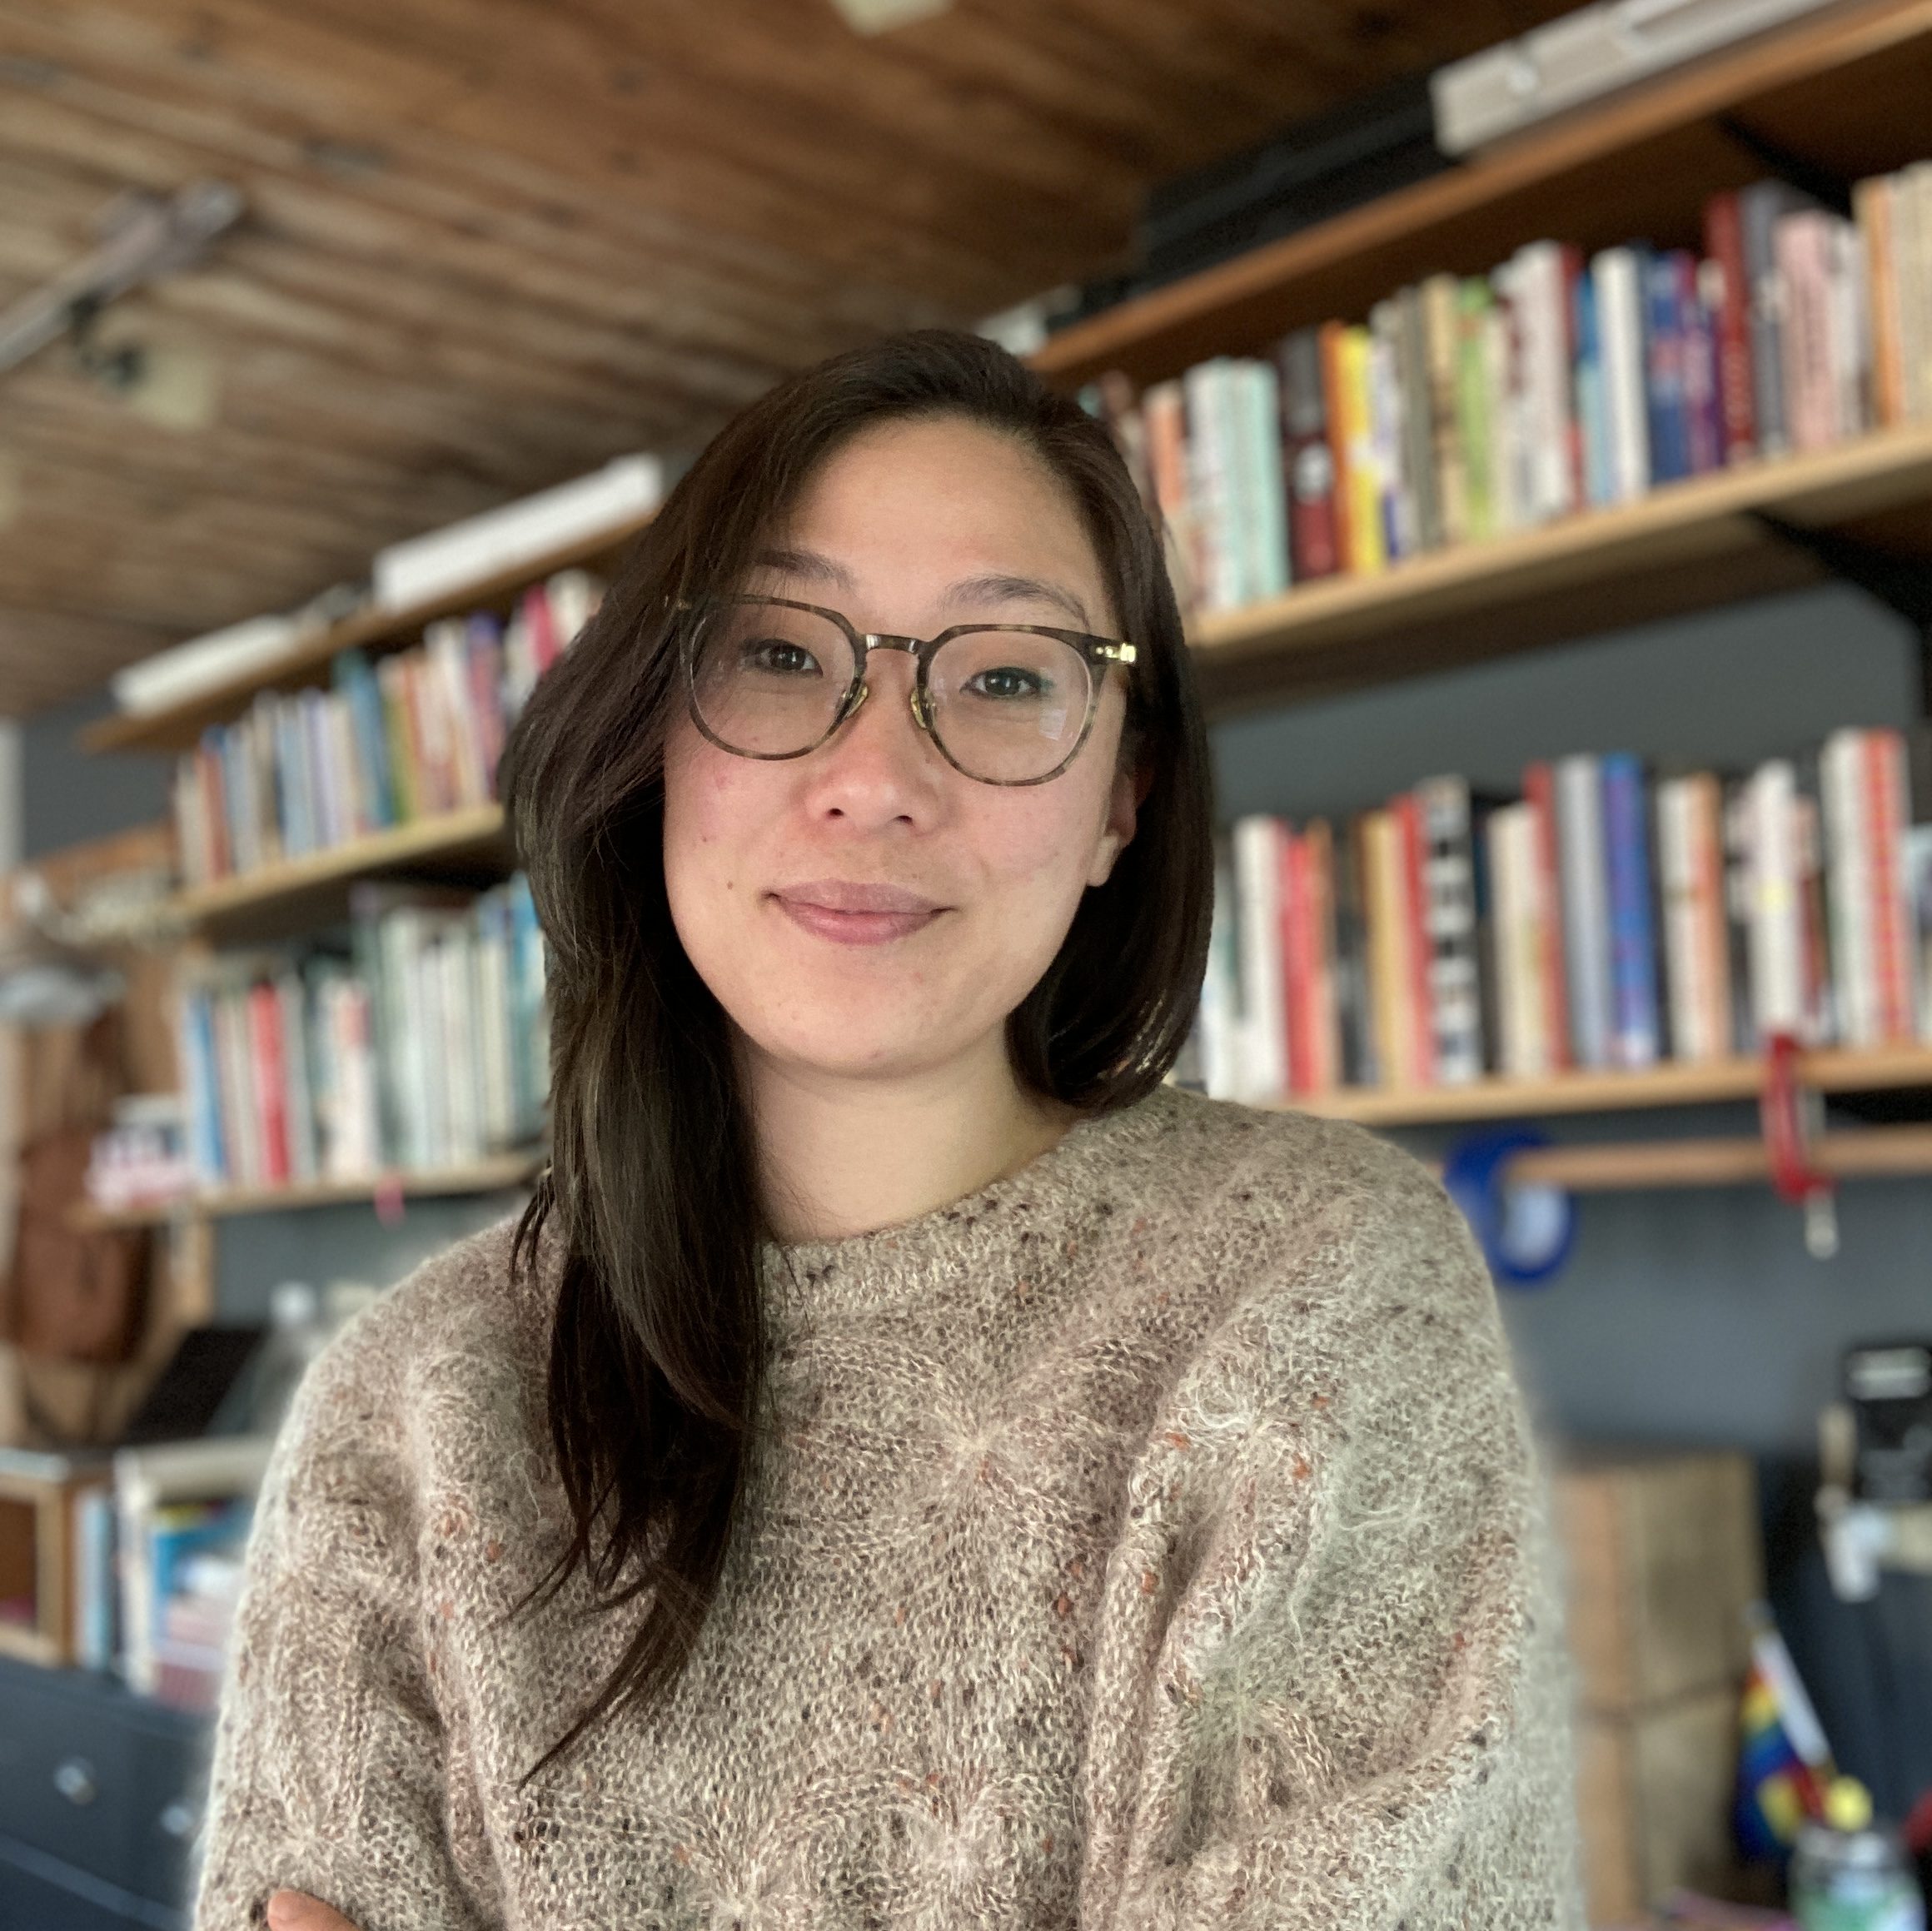 Photo of Una Lee, a Korean woman with long hair and glasses. She is wearing a fuzzy beige sweater and standing in front of a bookshelf.